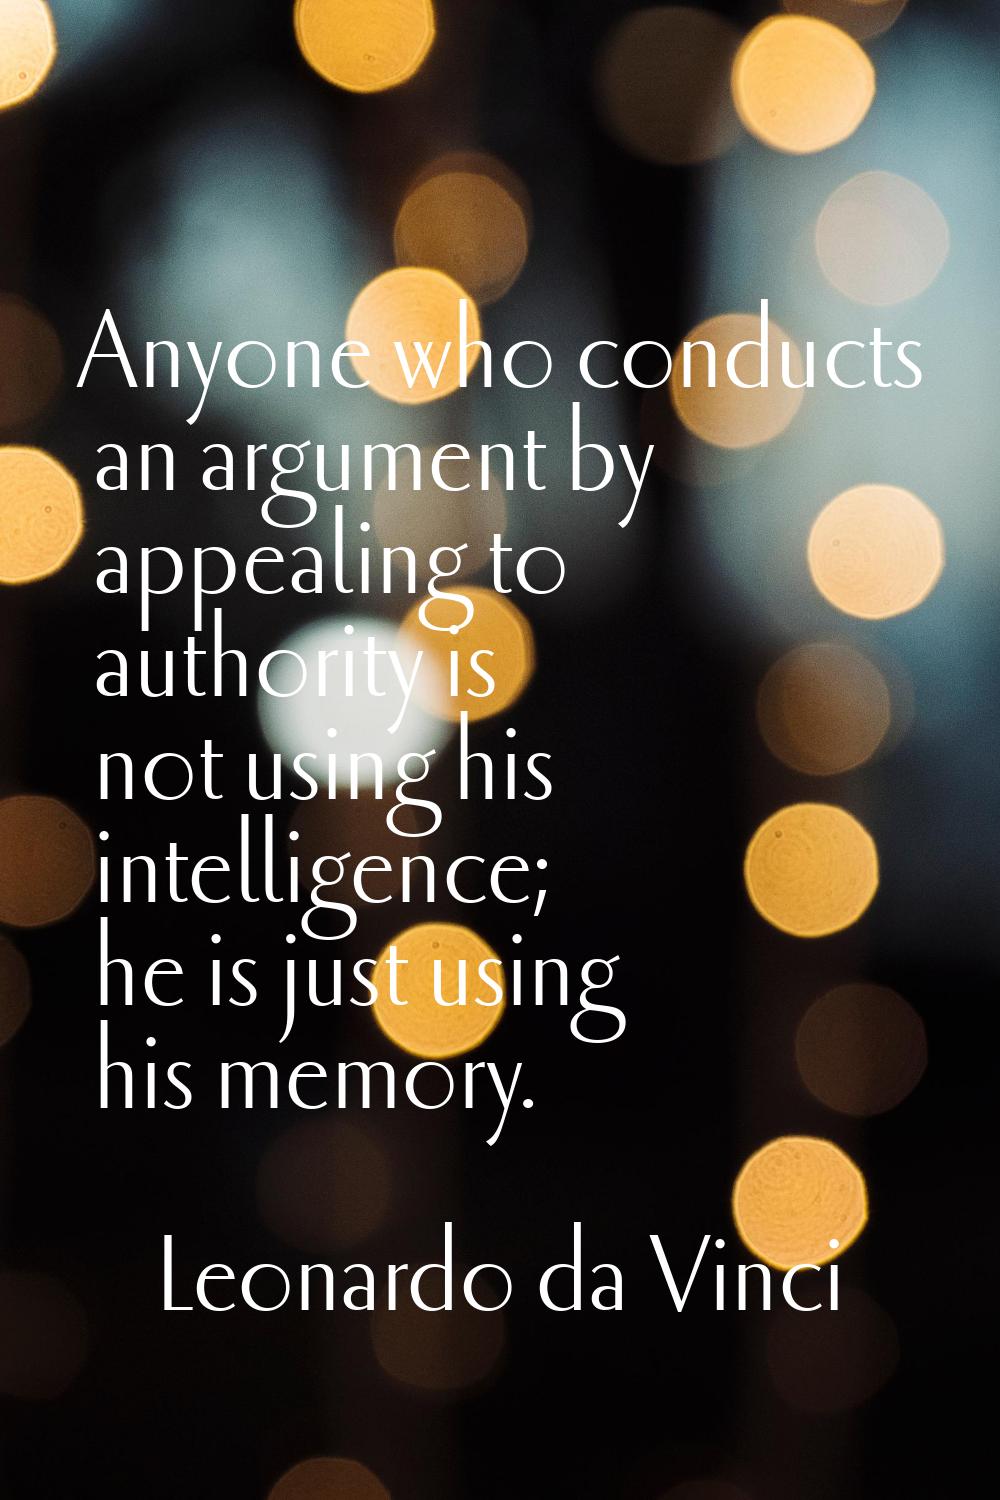 Anyone who conducts an argument by appealing to authority is not using his intelligence; he is just